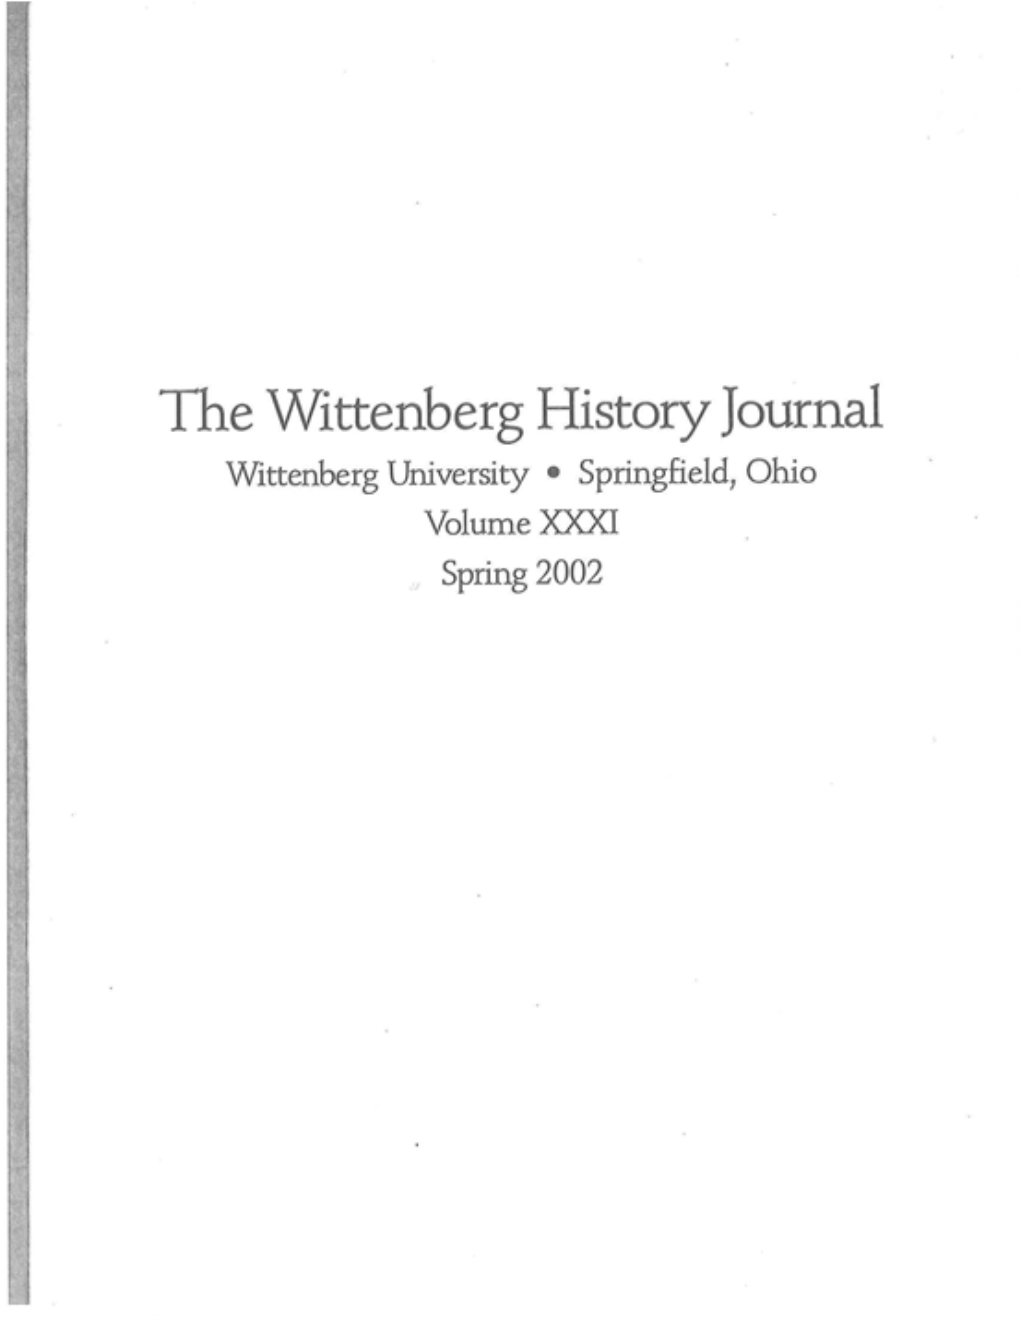 The Wittenberg History Journal